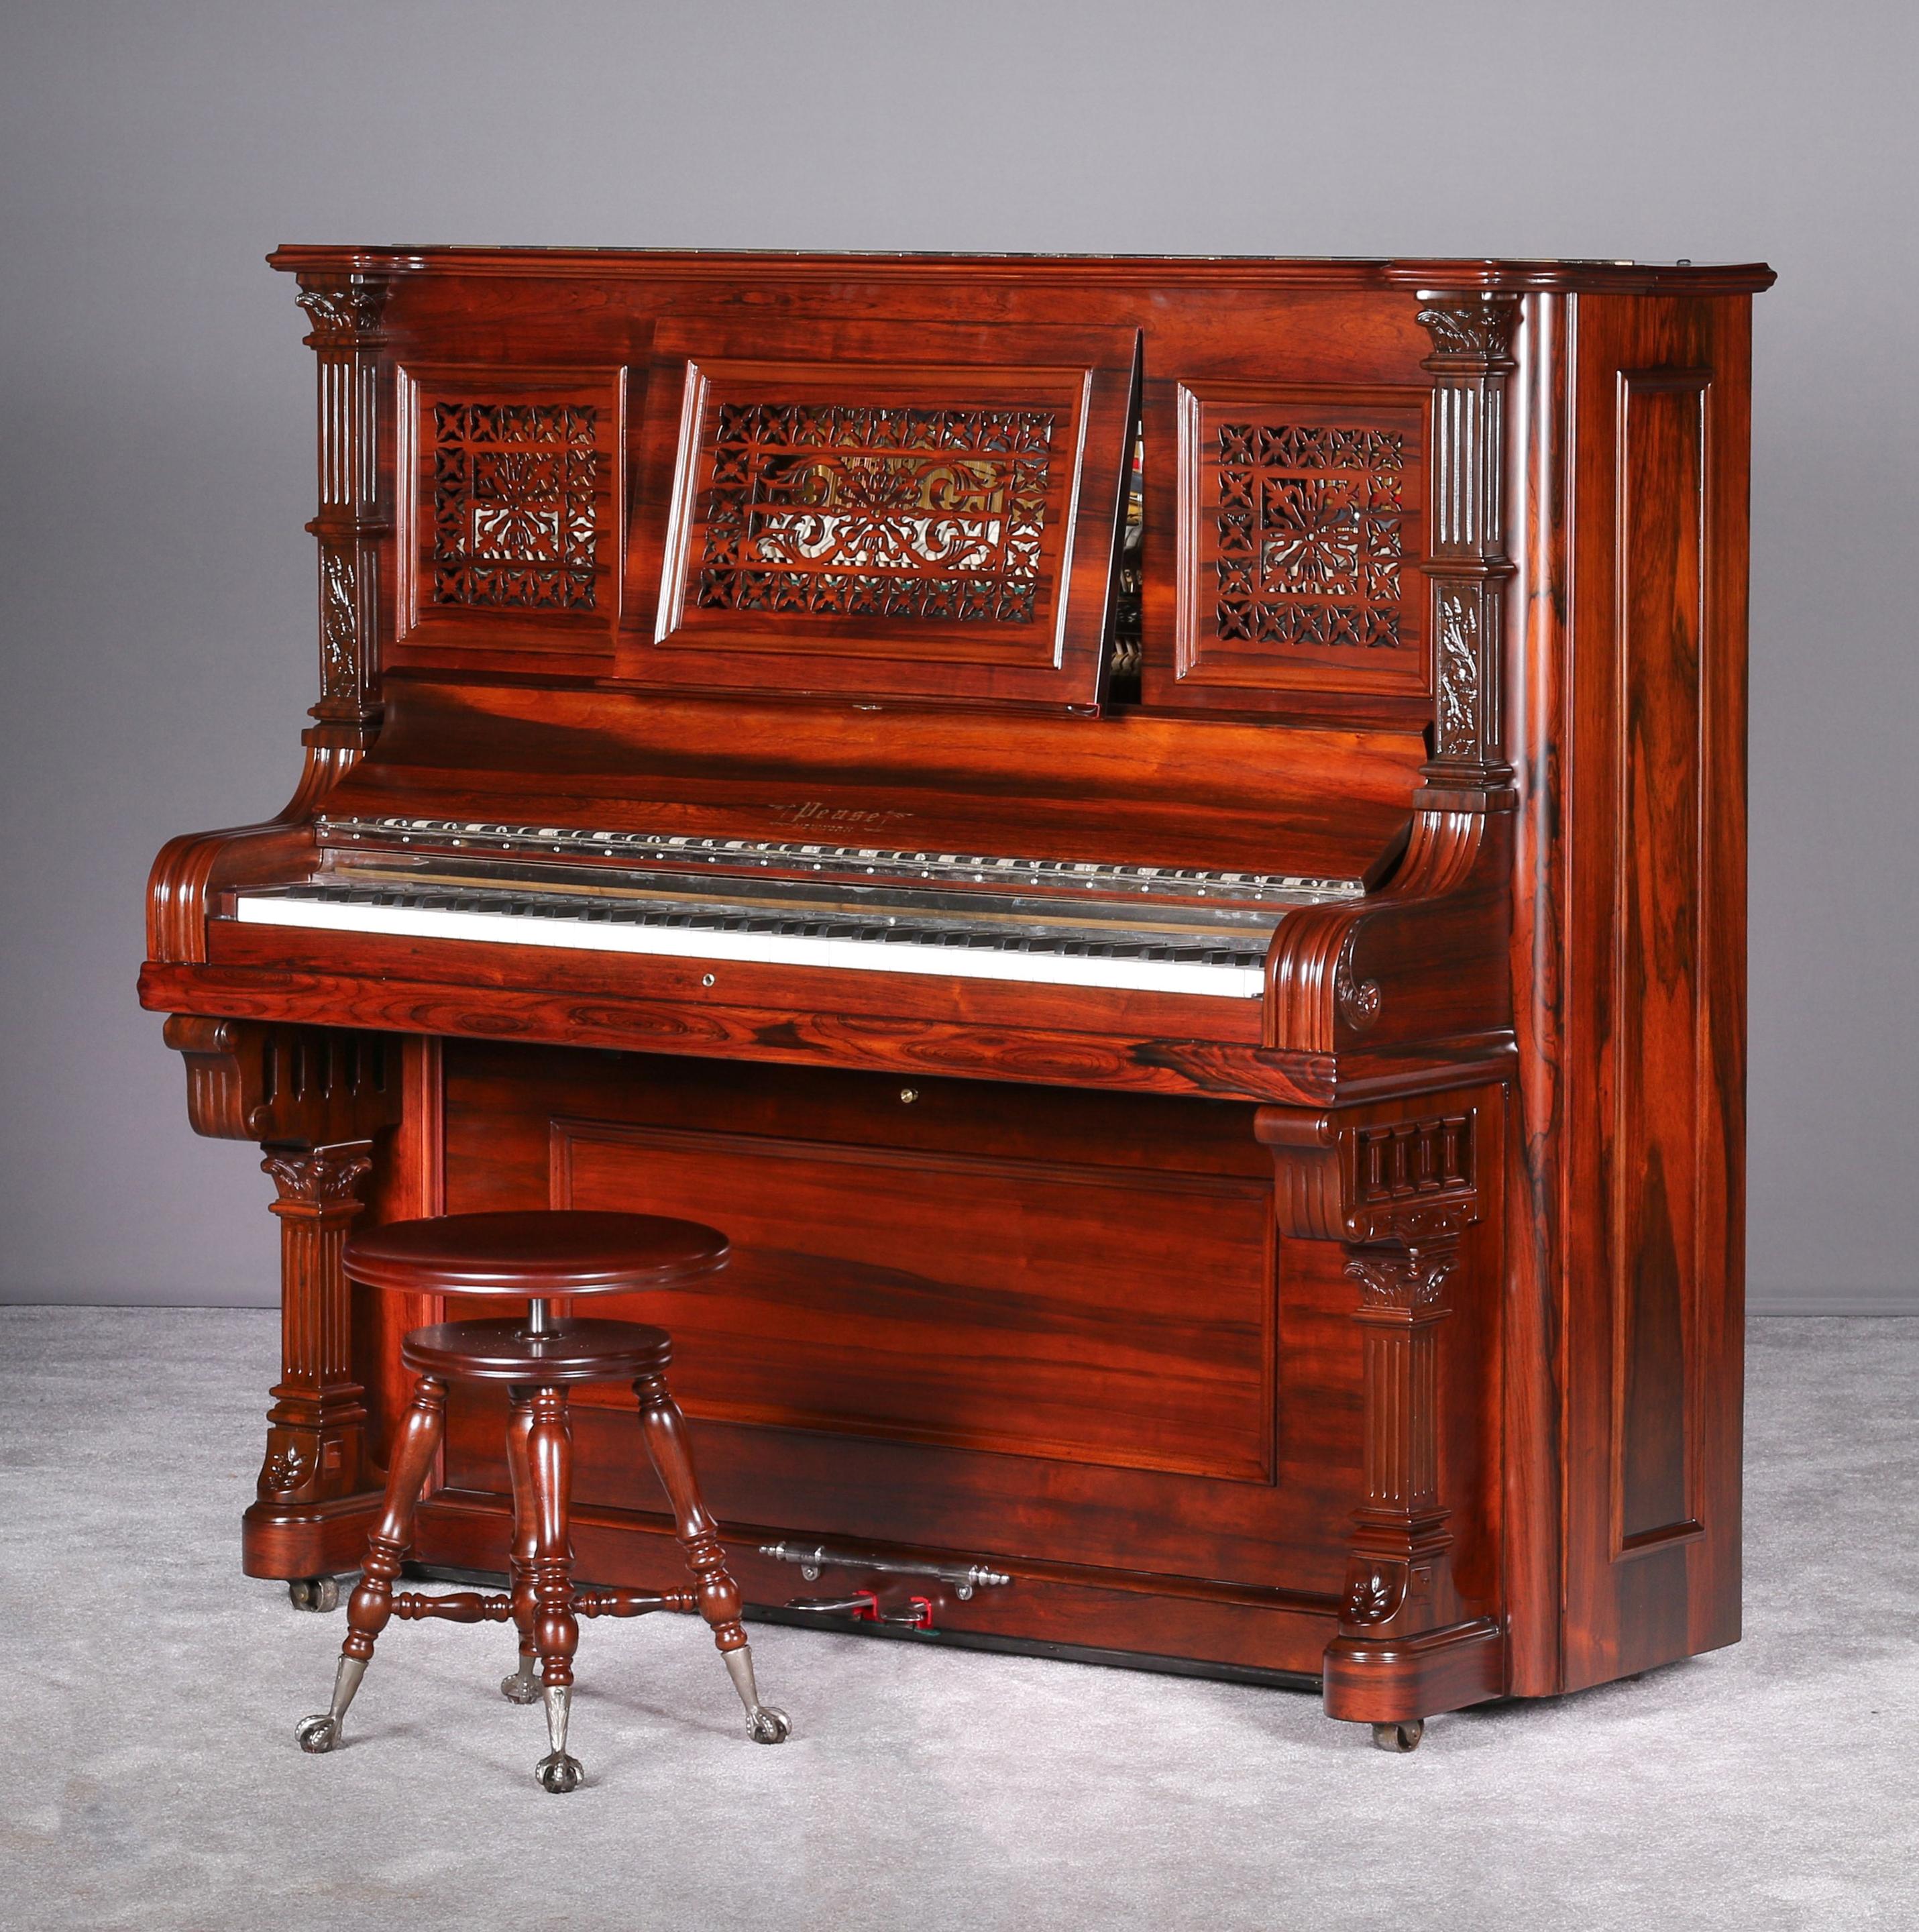 Fully Restored 1891 Pease Upright Piano